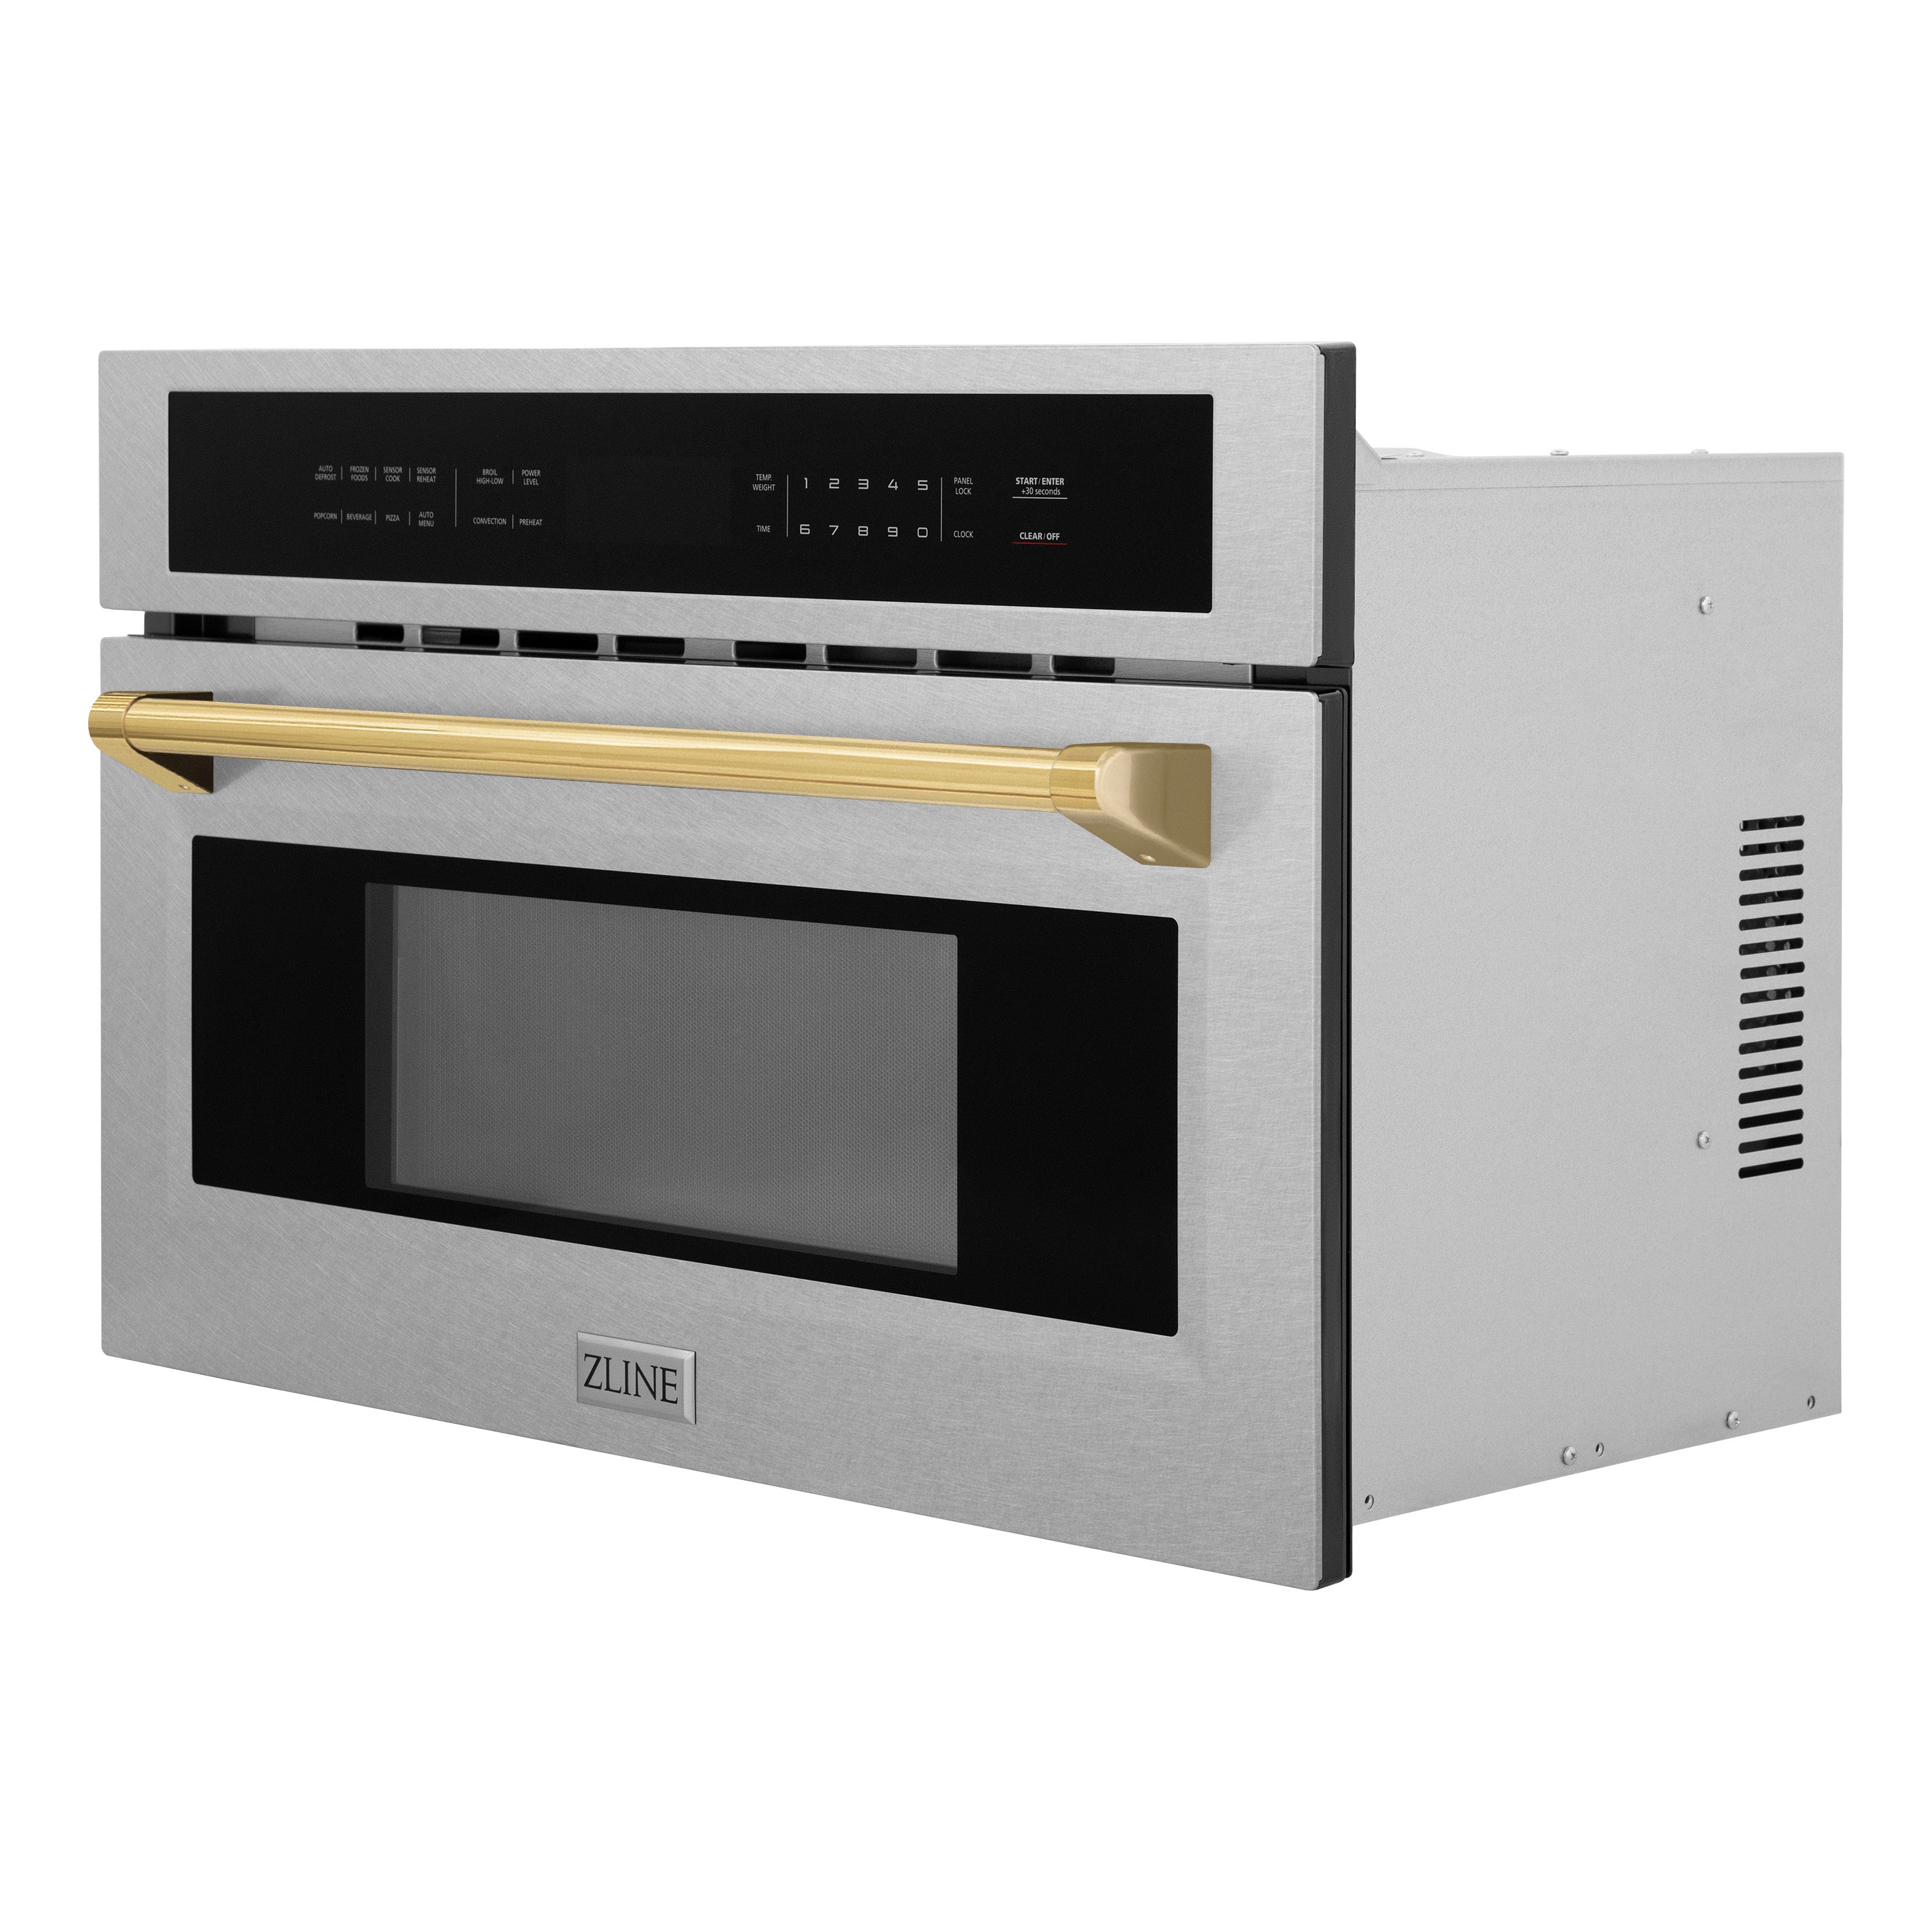 ZLINE Autograph Edition 30” 1.6 cu ft. Built-in Convection Microwave Oven in Fingerprint Resistant Stainless Steel and Polished Gold Accents (MWOZ-30-SS-G